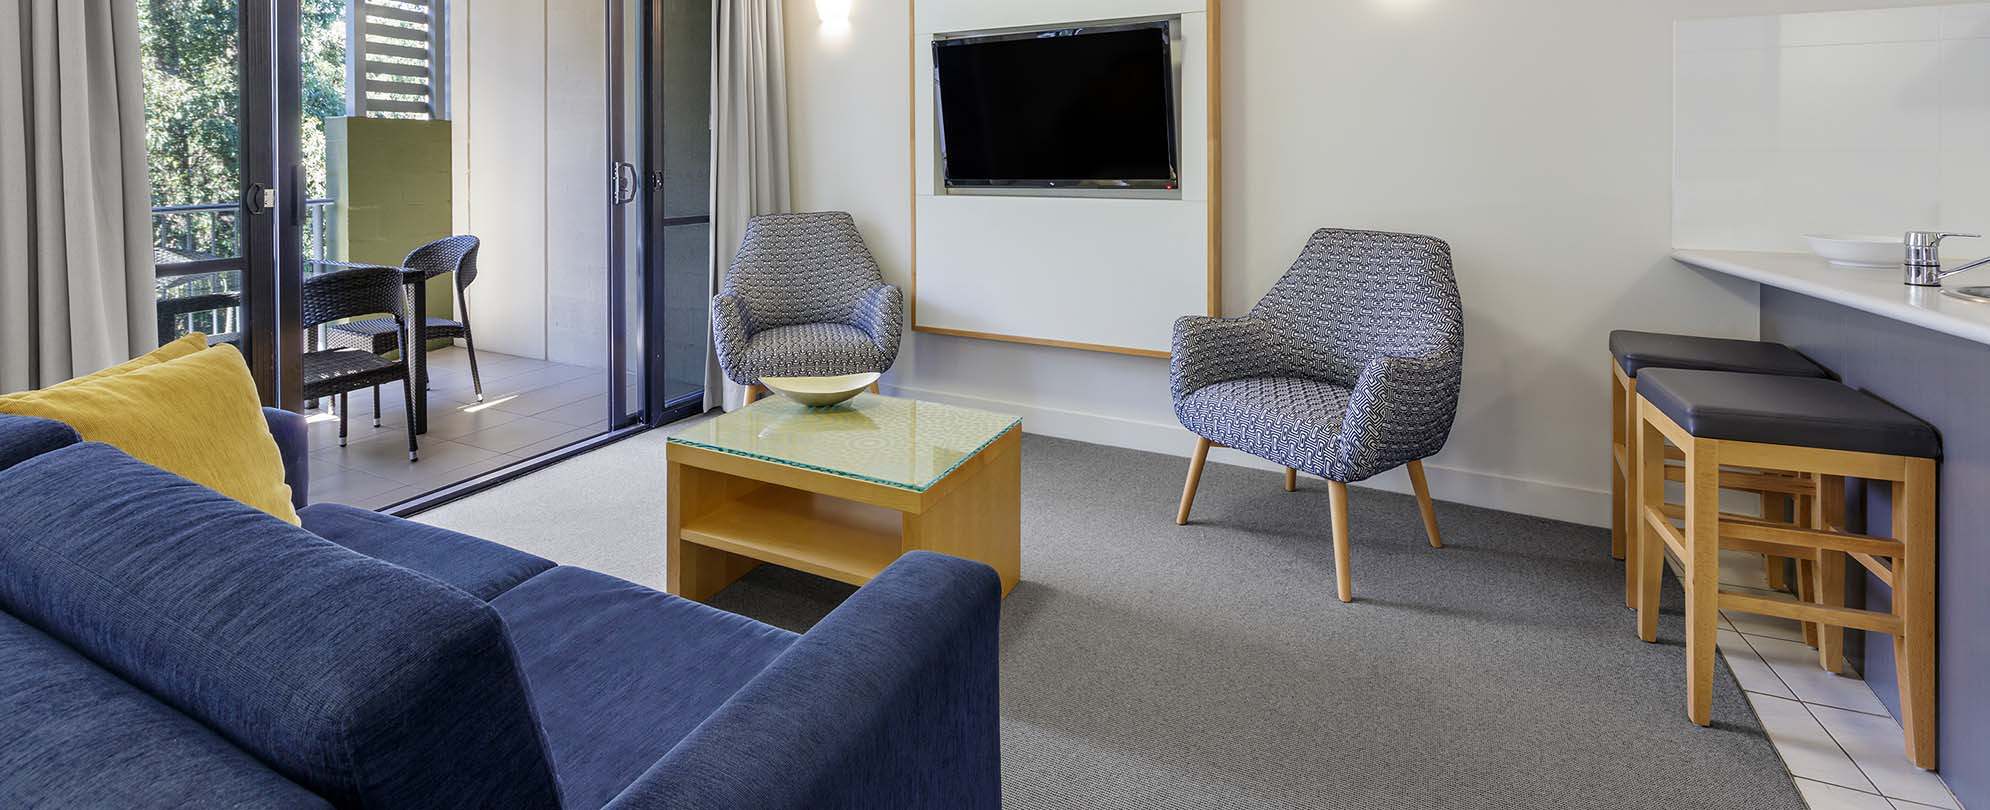 The living area of a 1-bedroom suite at Club Wyndham Coffs Harbor.